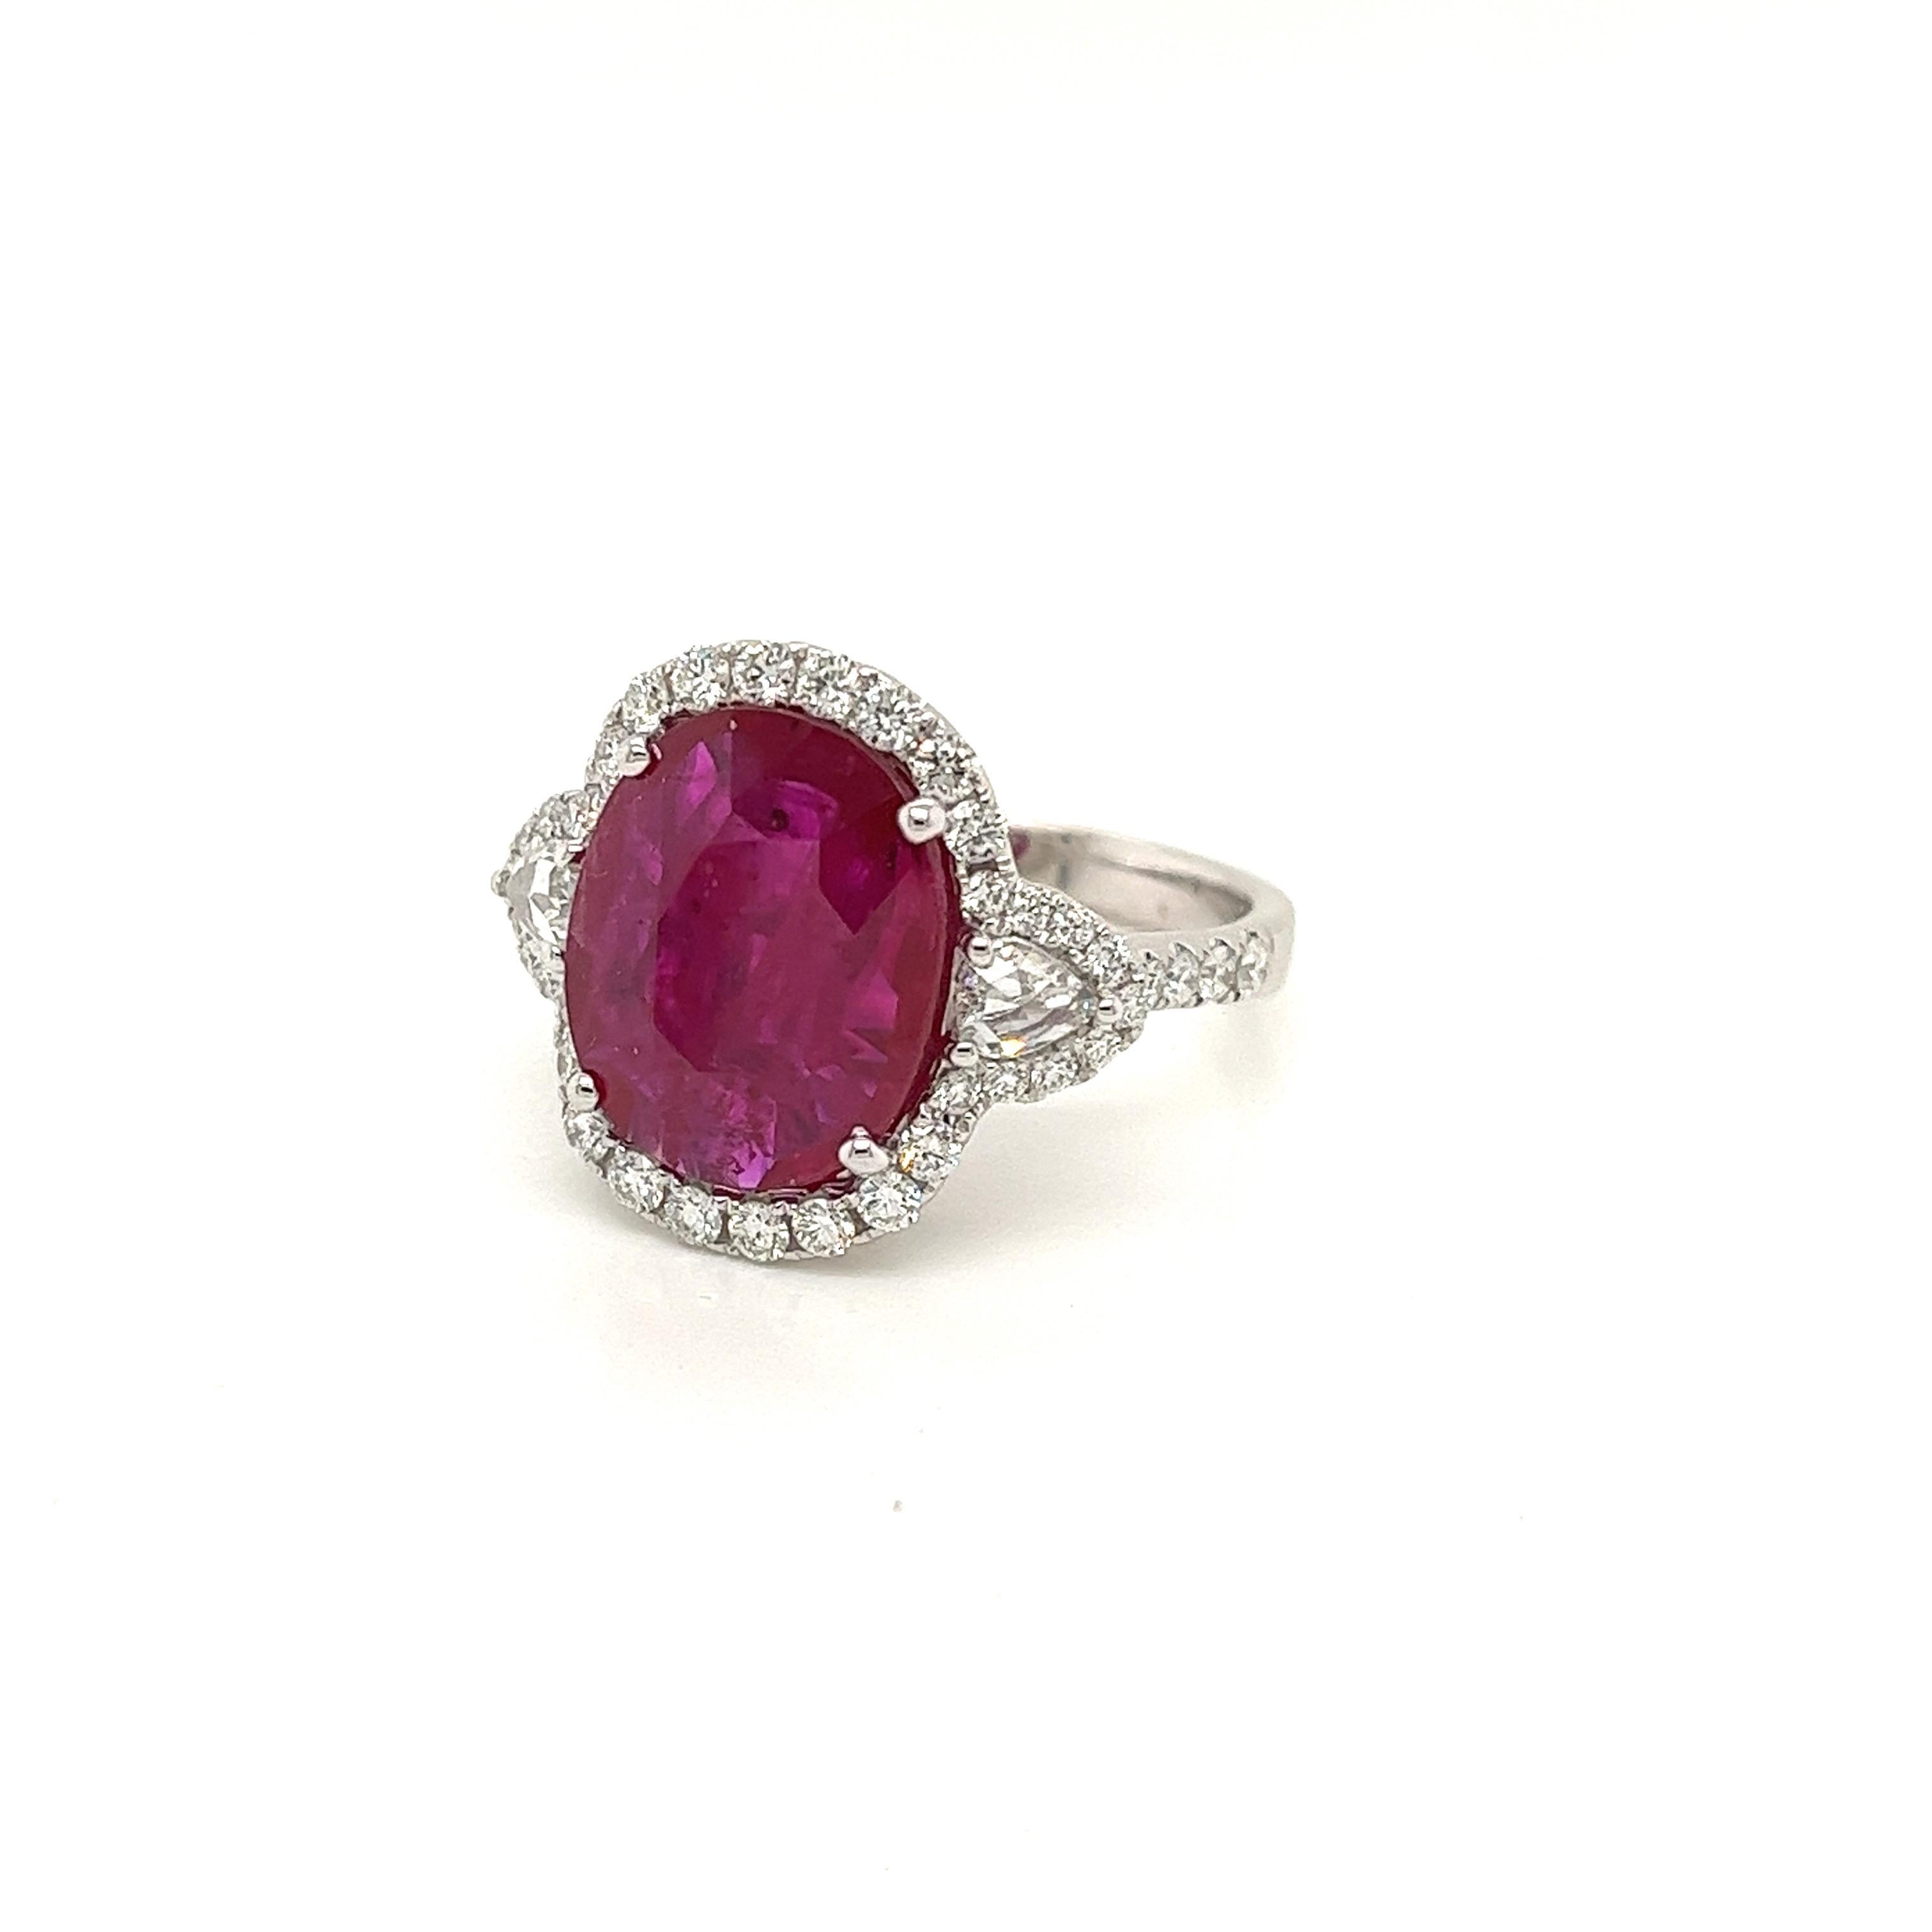 Certified Oval Mozambique Ruby weighing 4.64 carats
Measuring (13.18x10.90x3.01) mm
Diamonds weighing .93 carats
GH-SI1
Set in 18k white gold ring
6.11 g